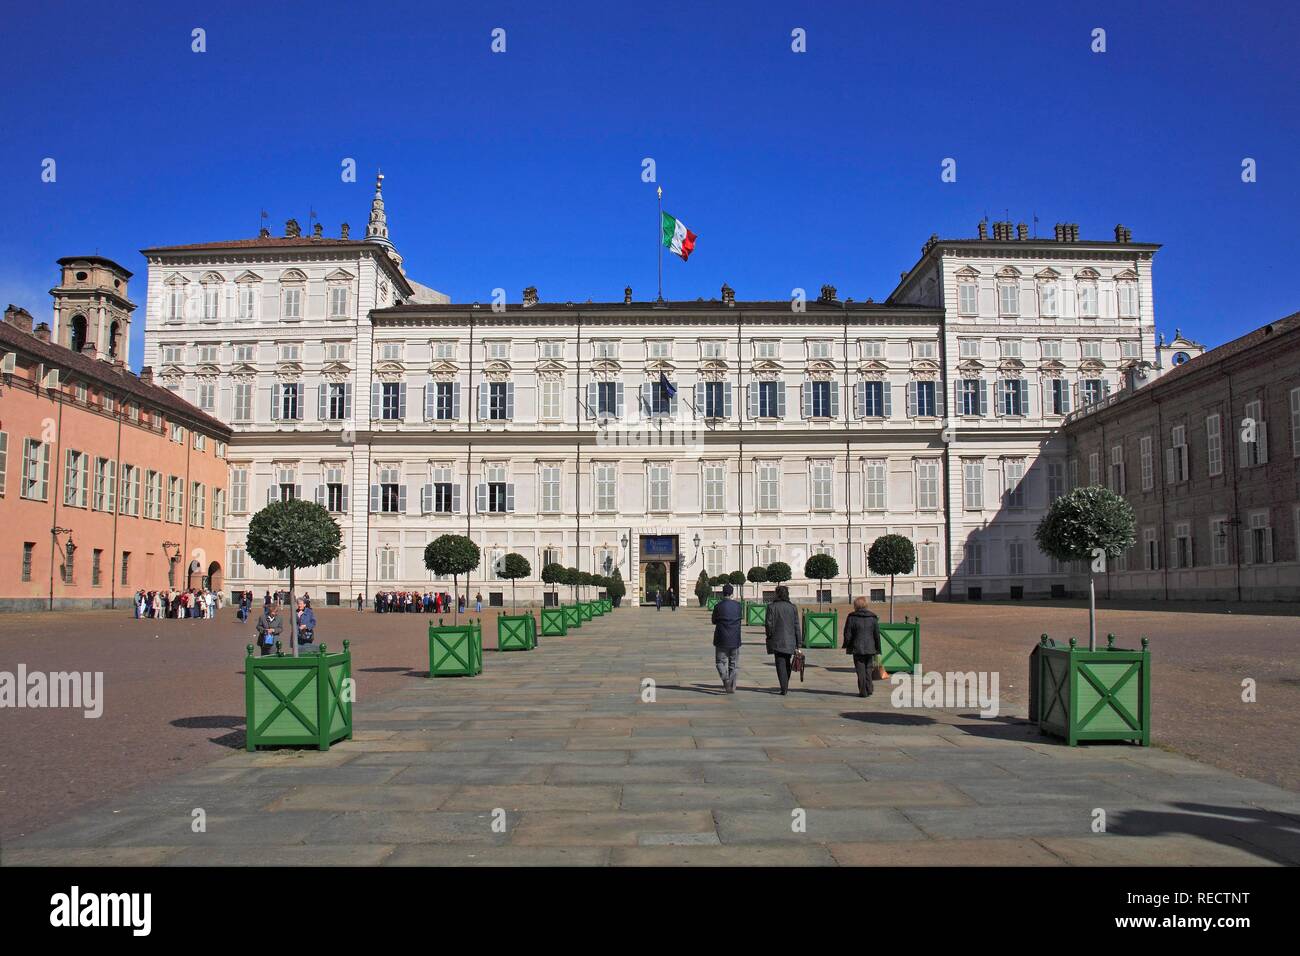 Palazzo Reale and the Piazetta Reale, Turin, Torino, Piedmont, Italy, Europe Stock Photo